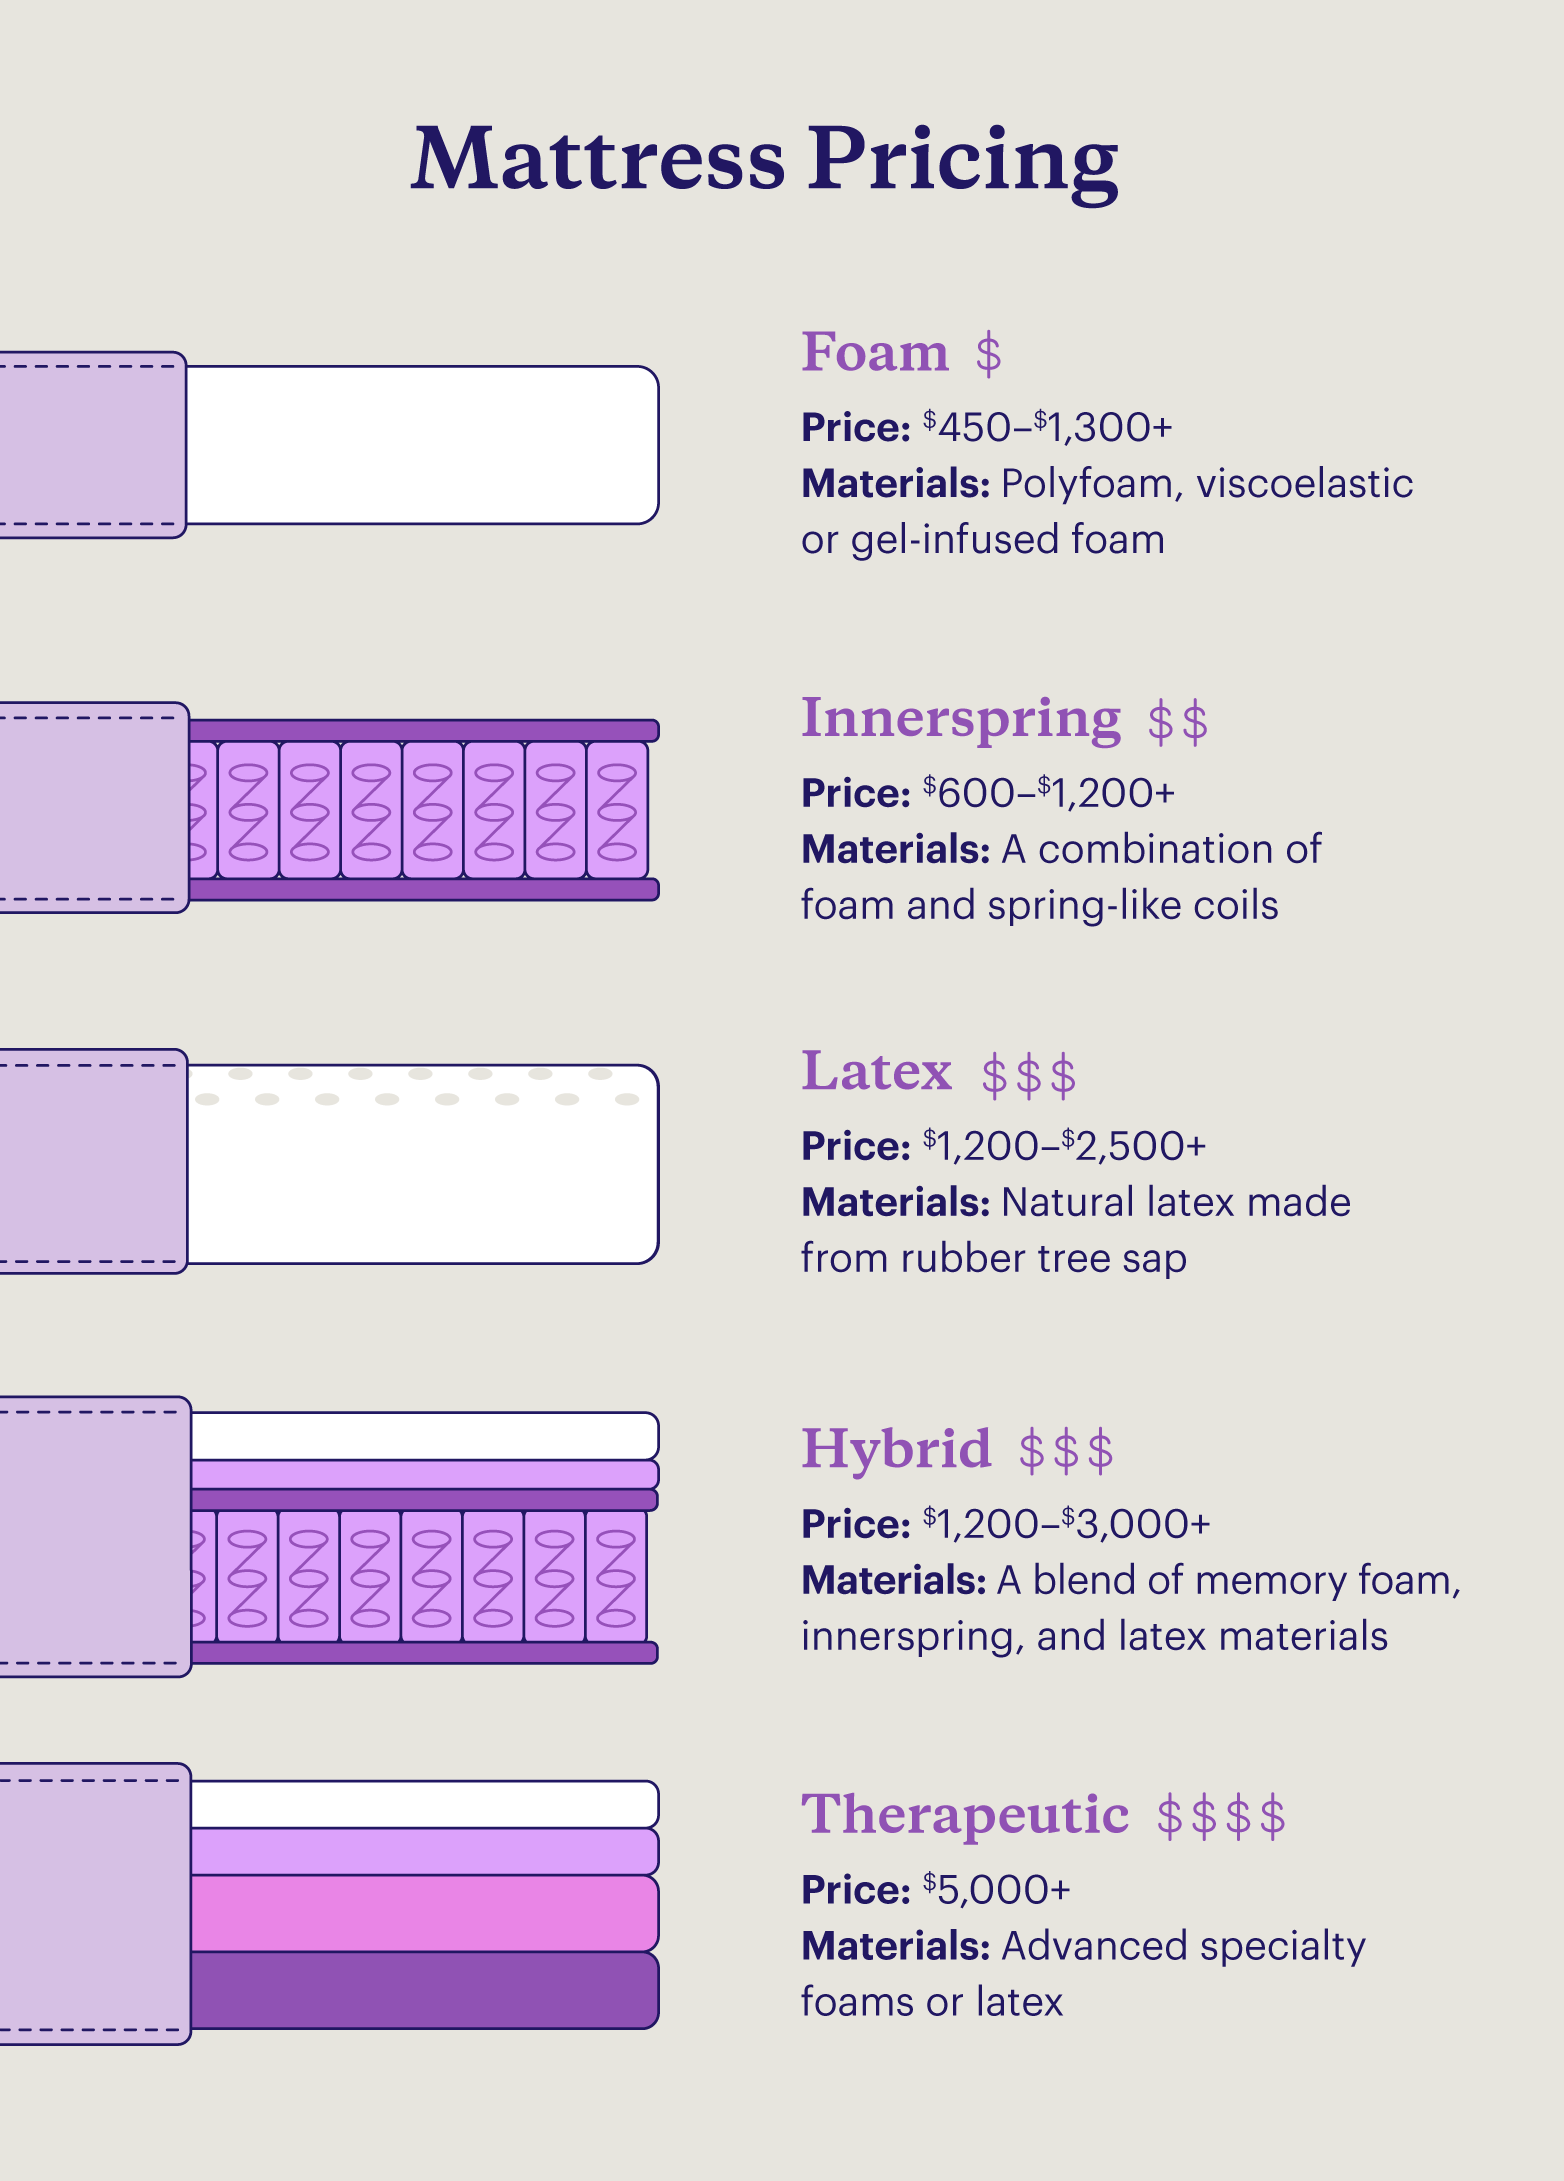 A graphic details the average mattress price for foam, innerspring, latex, hybrid, and therapeutic beds. 